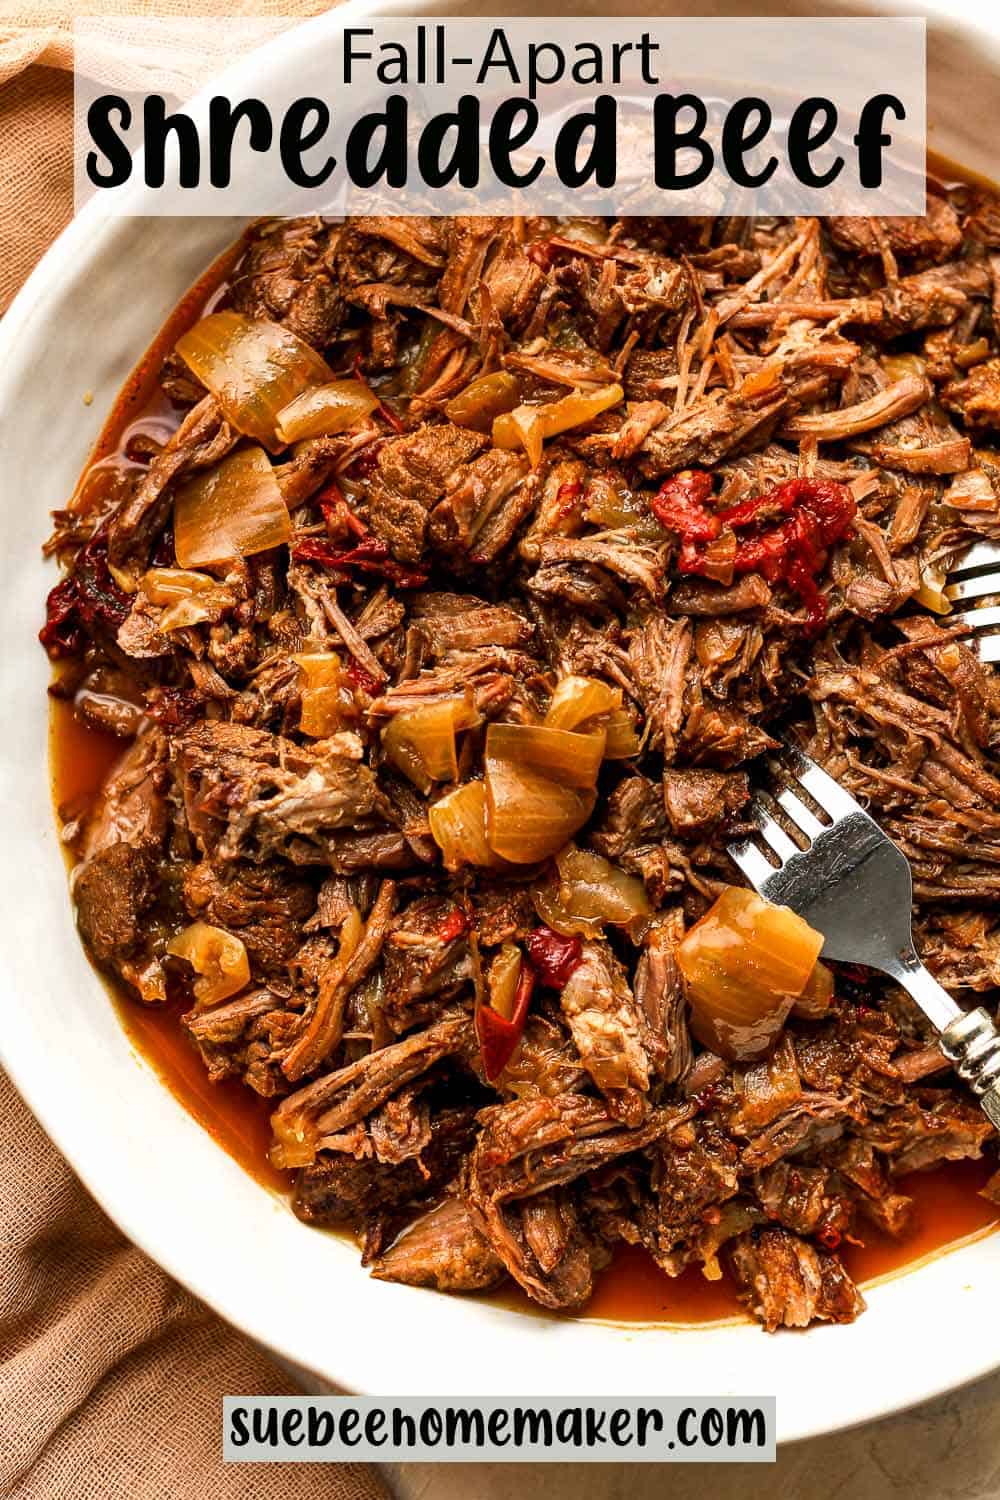 A bowl of fall-apart shredded beef.